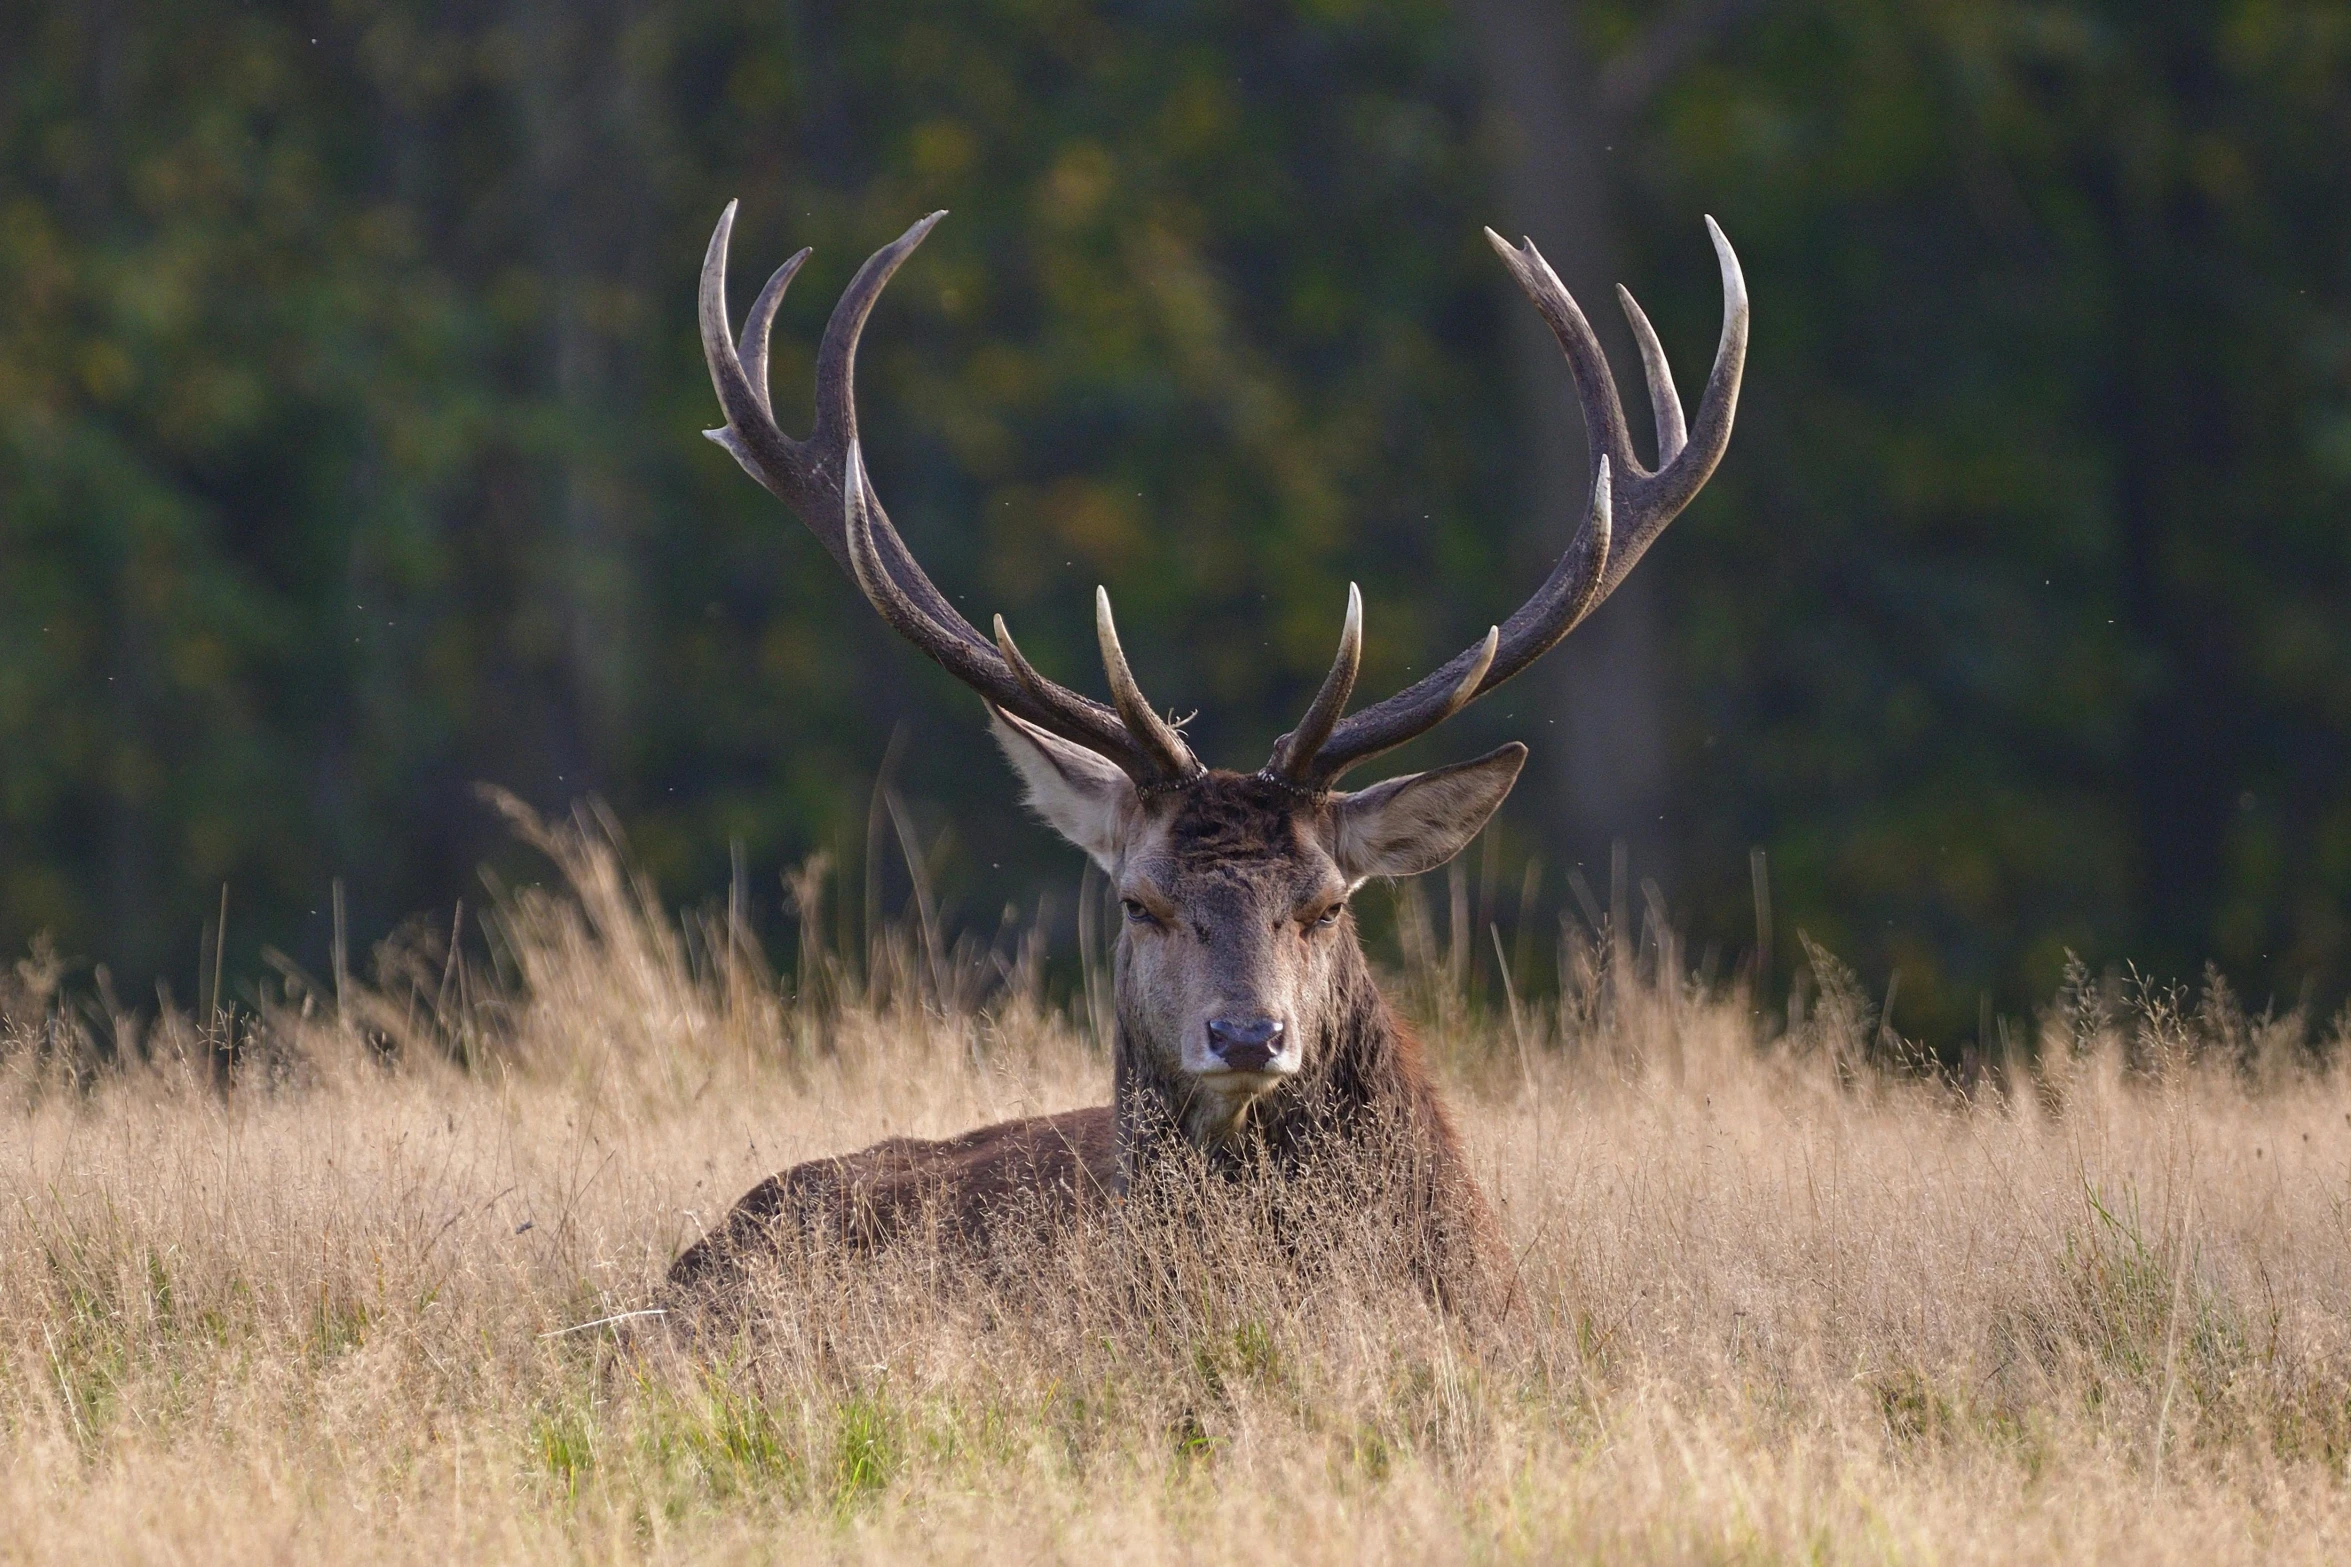 a deer with very large horns and antlers standing in tall grass